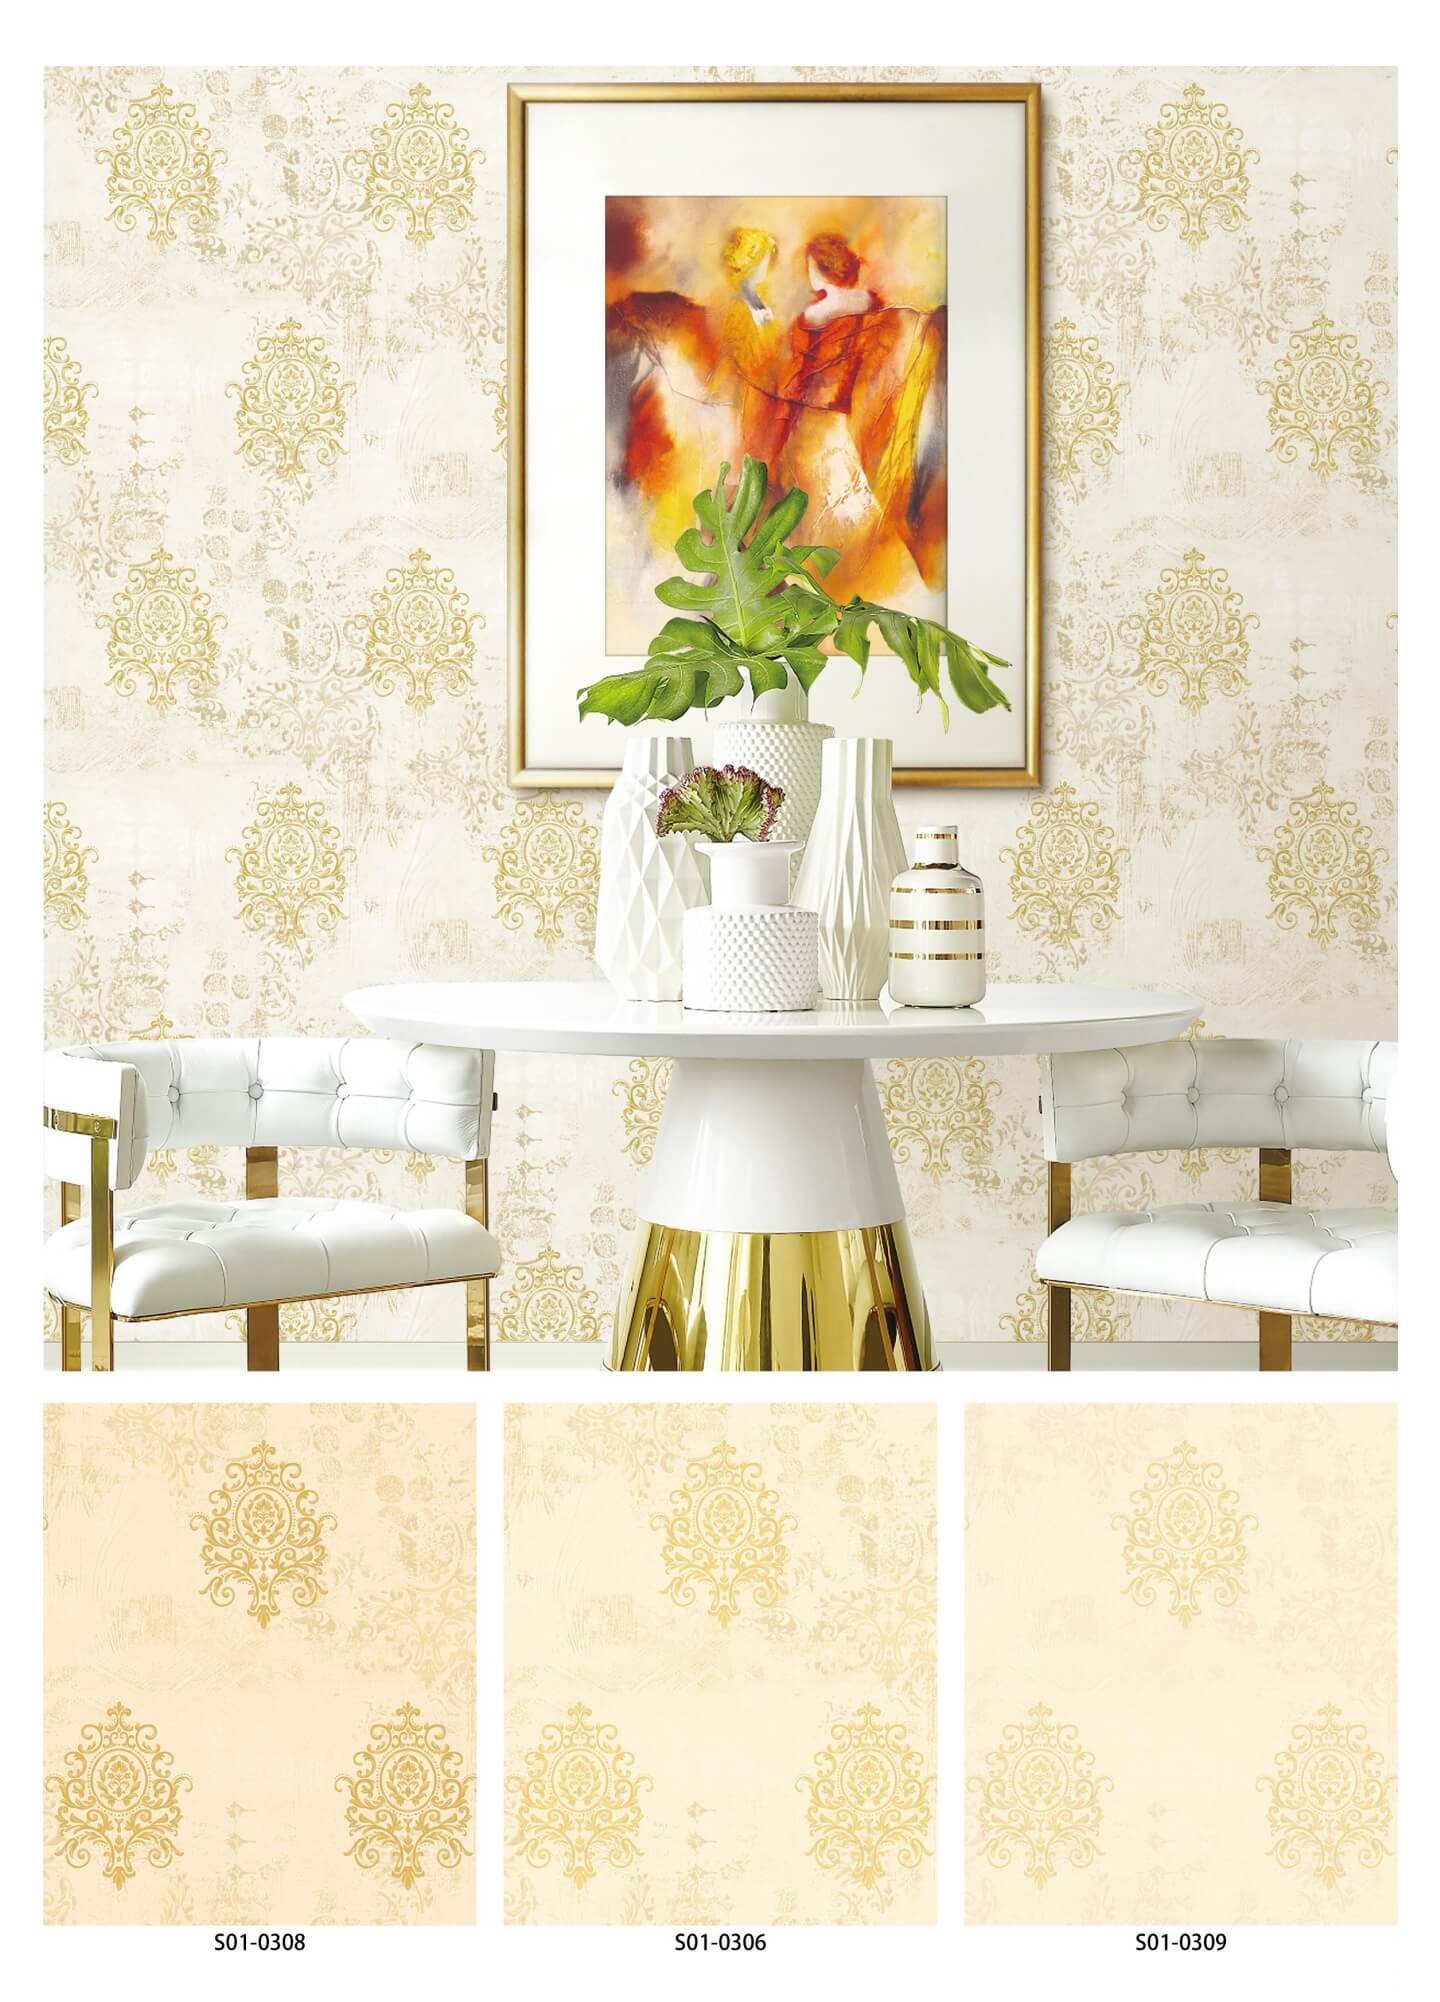 Floral Design Wallpapers Manufacture With High-Quality PVC Material Designer Premium Quality Water-resistant Wallpaper (13)